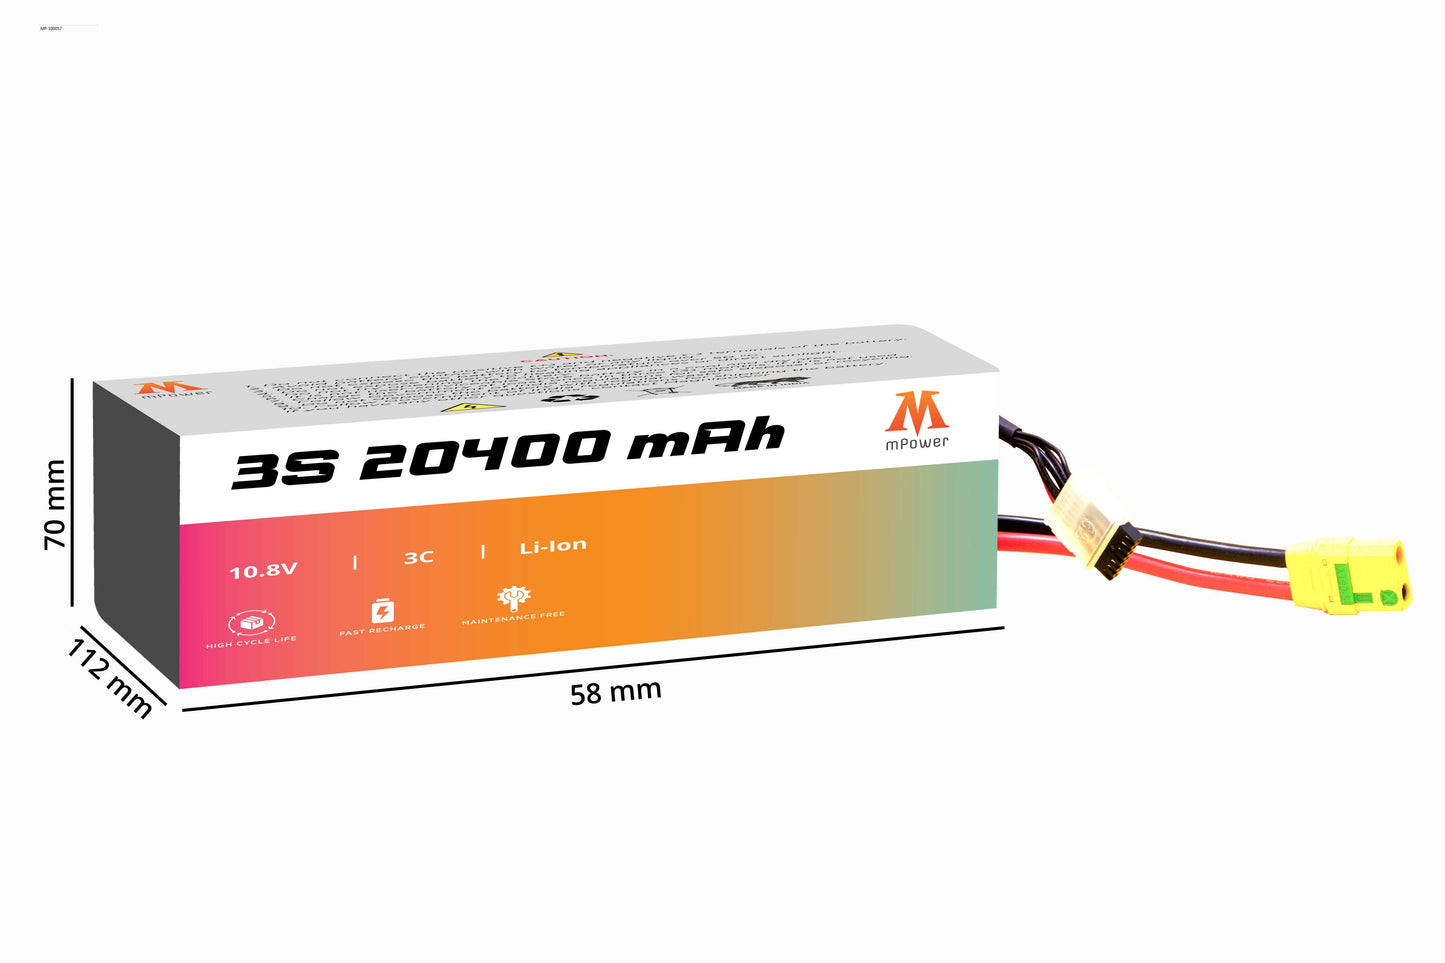 mPower 3S 20400mAh Lithium-Ion Battery for Surveillance Drones